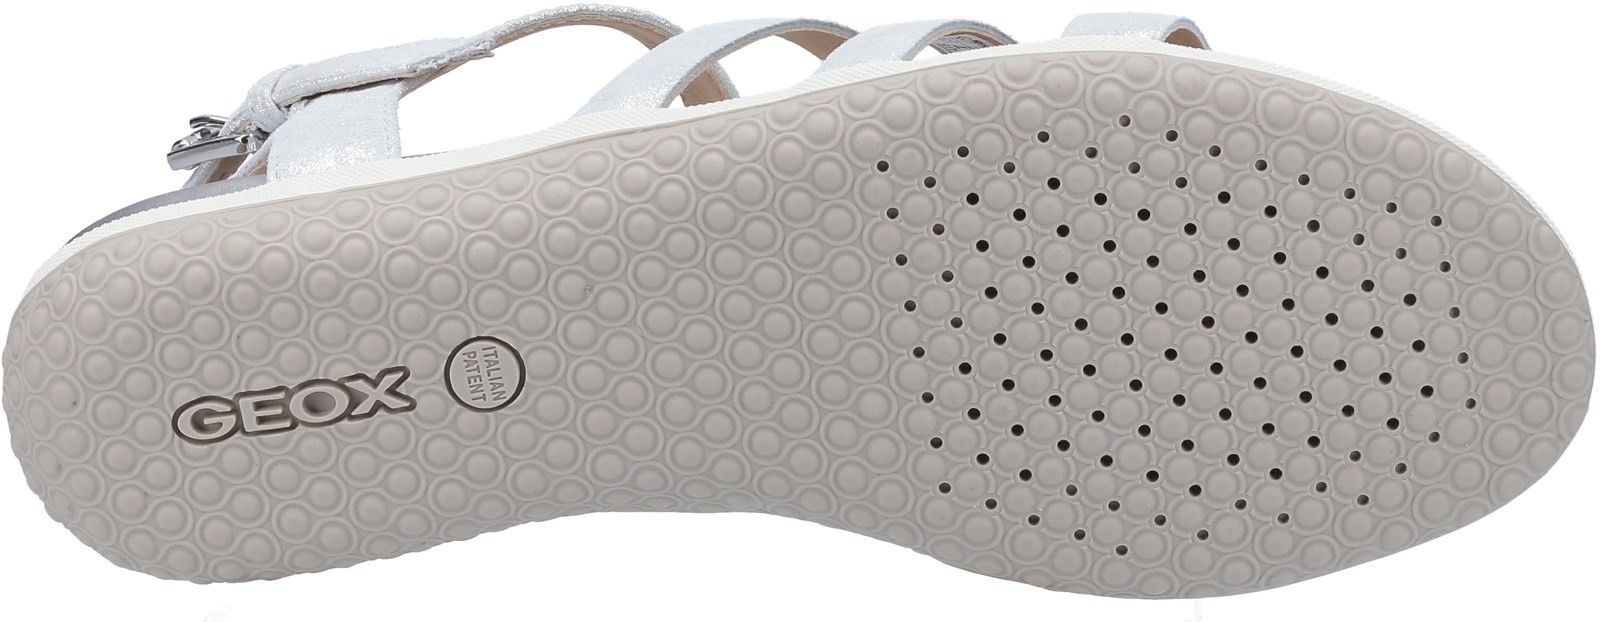 This shoe will pamper your feet on warm summer days. Practical and versatile, Geox's Vega sandals have been crafted from shiny silver-tone suede and will prove to be an easy match to casual, informal, leisuretime and everyday outfits.Sports Design. 
Adjustable. 
Full Leather Upper. 
Multipurpose. 
Wide Fit.